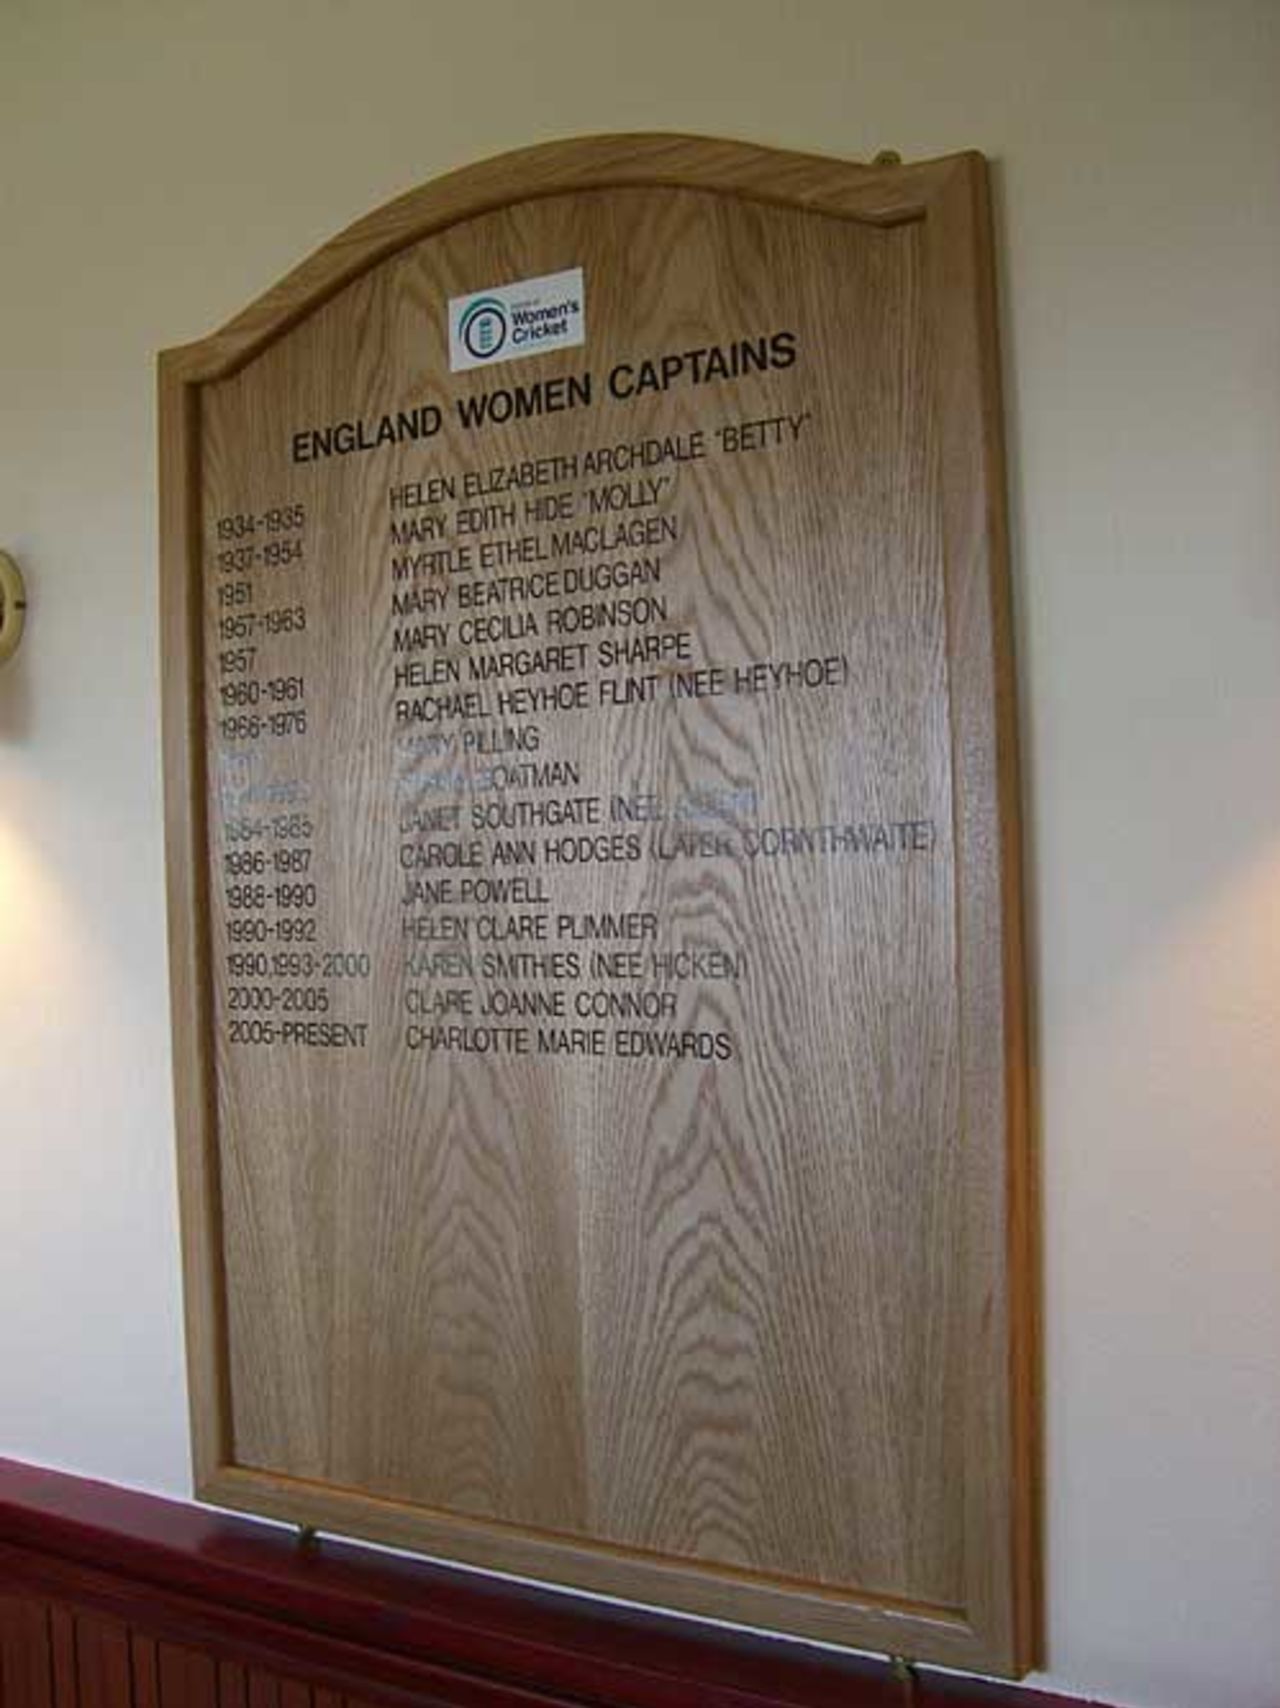 The honours board of England women captains is unveiled at Taunton, England women v India women, second Test, Taunton, 29 August, 2006